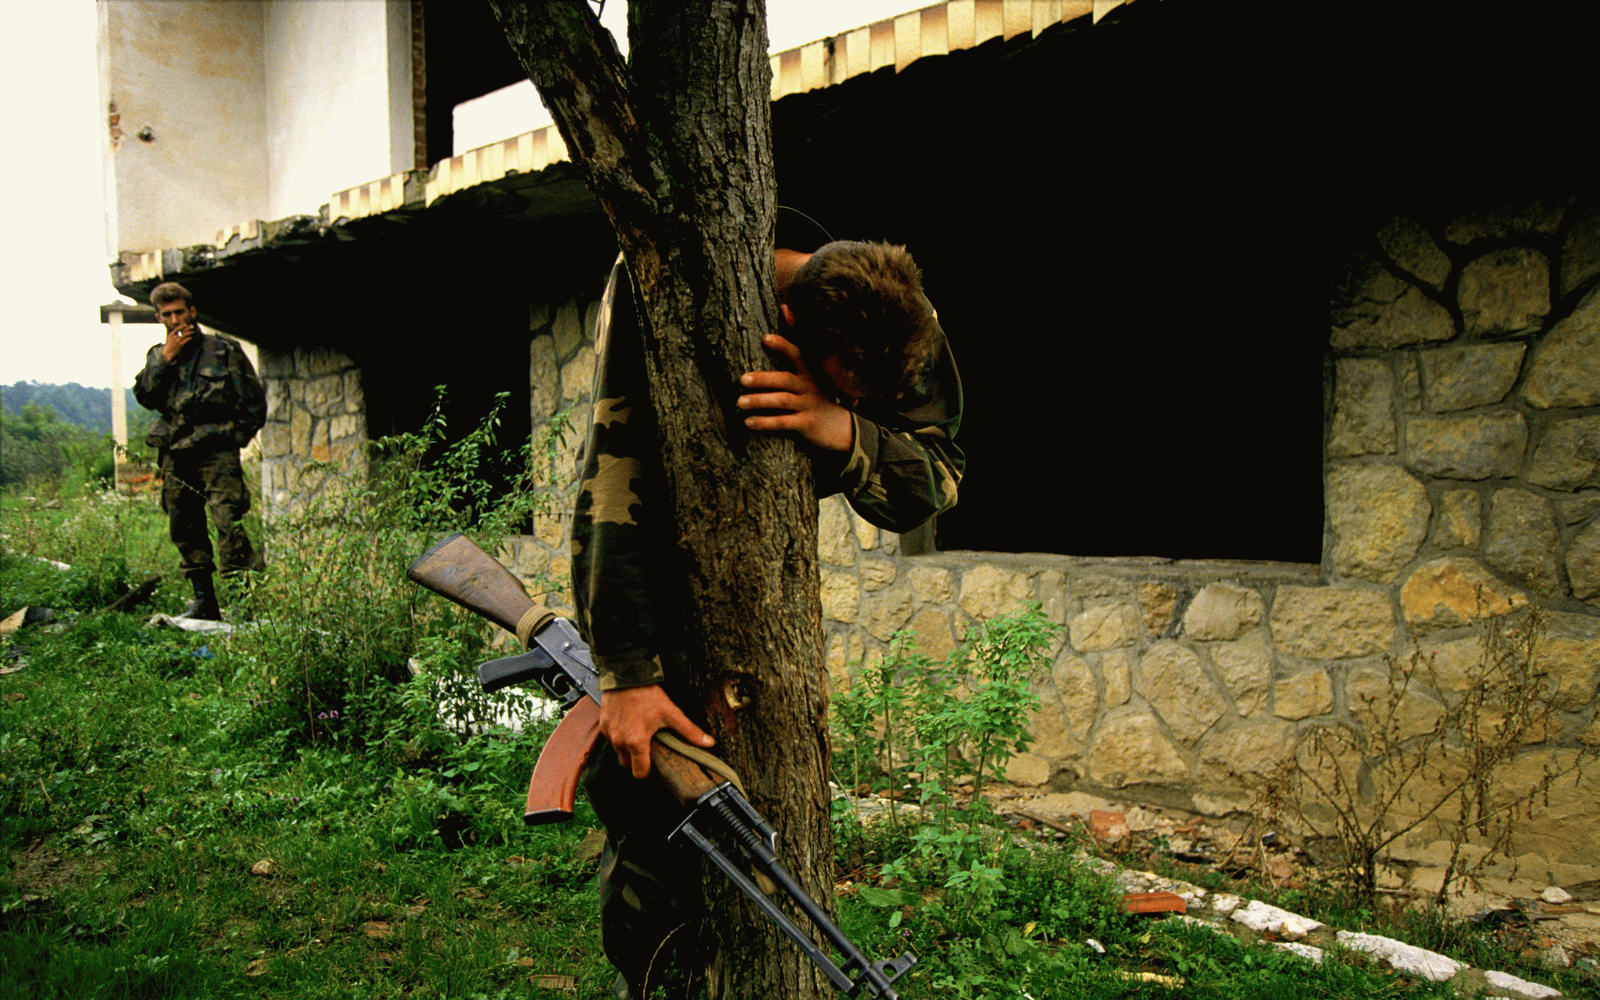 A Bosnian soldier stands on what is believed to be a mass grave outside his destroyed home. He was the sole survivor of a massacre that left 69 people dead, including his family.